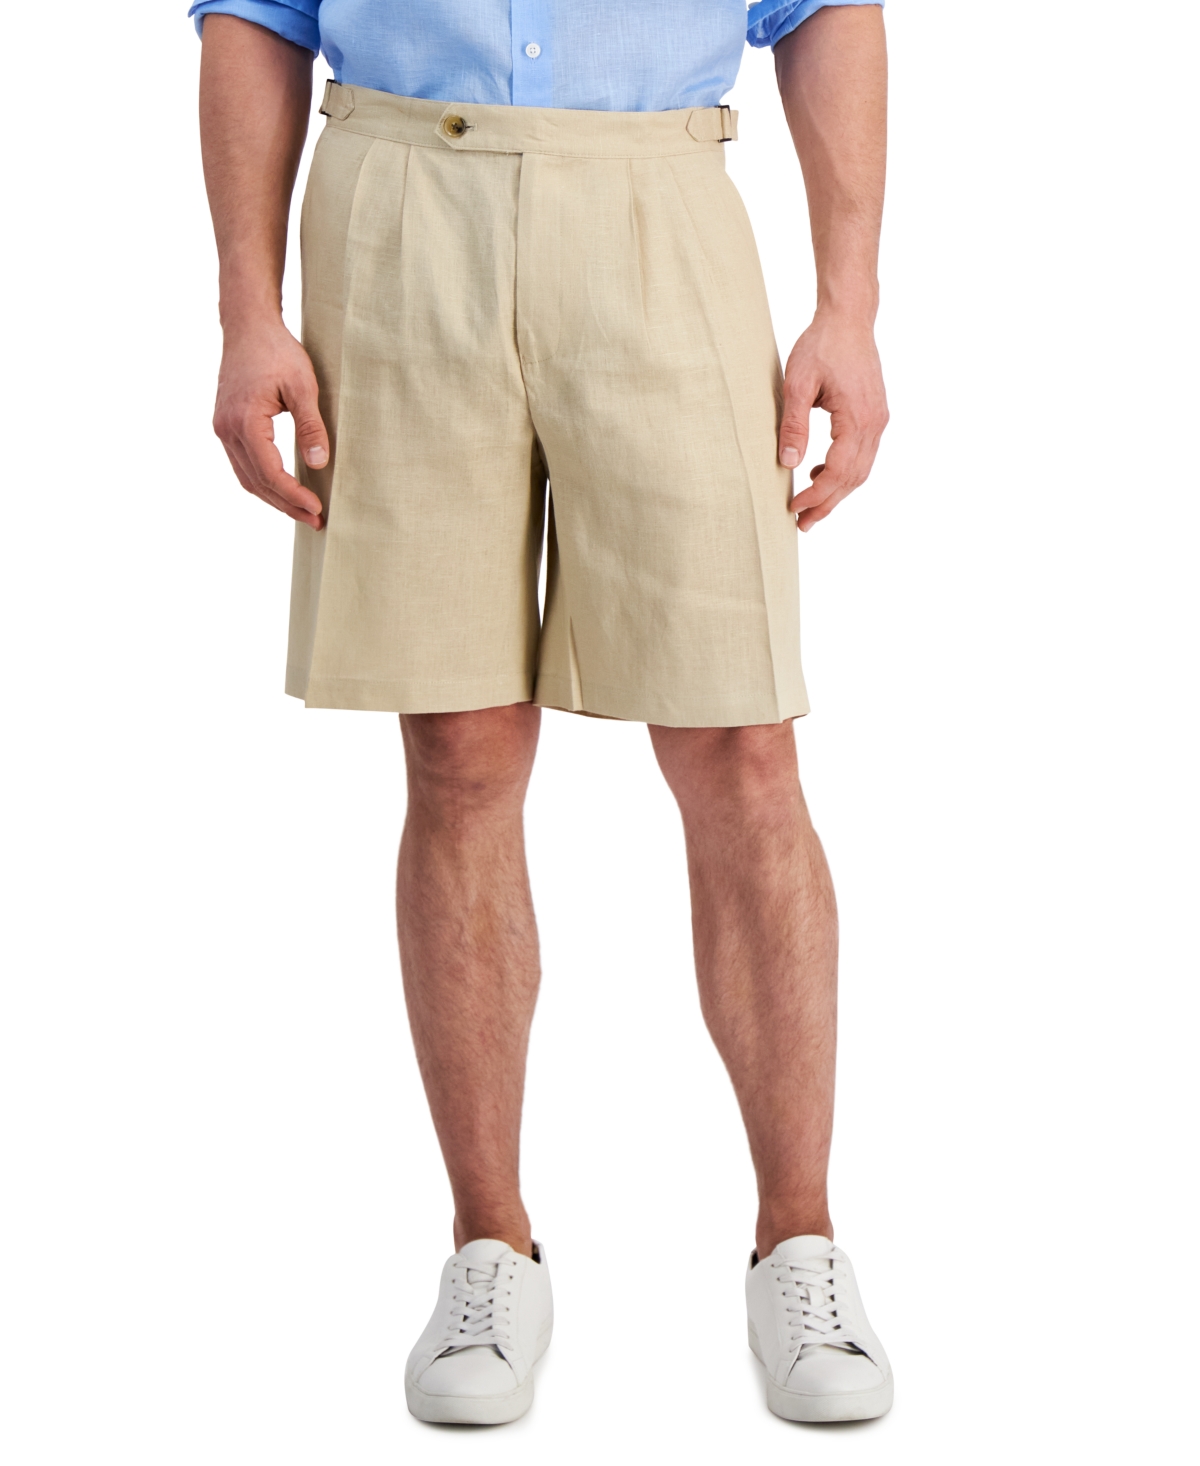 Men's Pleated Linen 9" Shorts, Created for Macy's - Winter Ivory